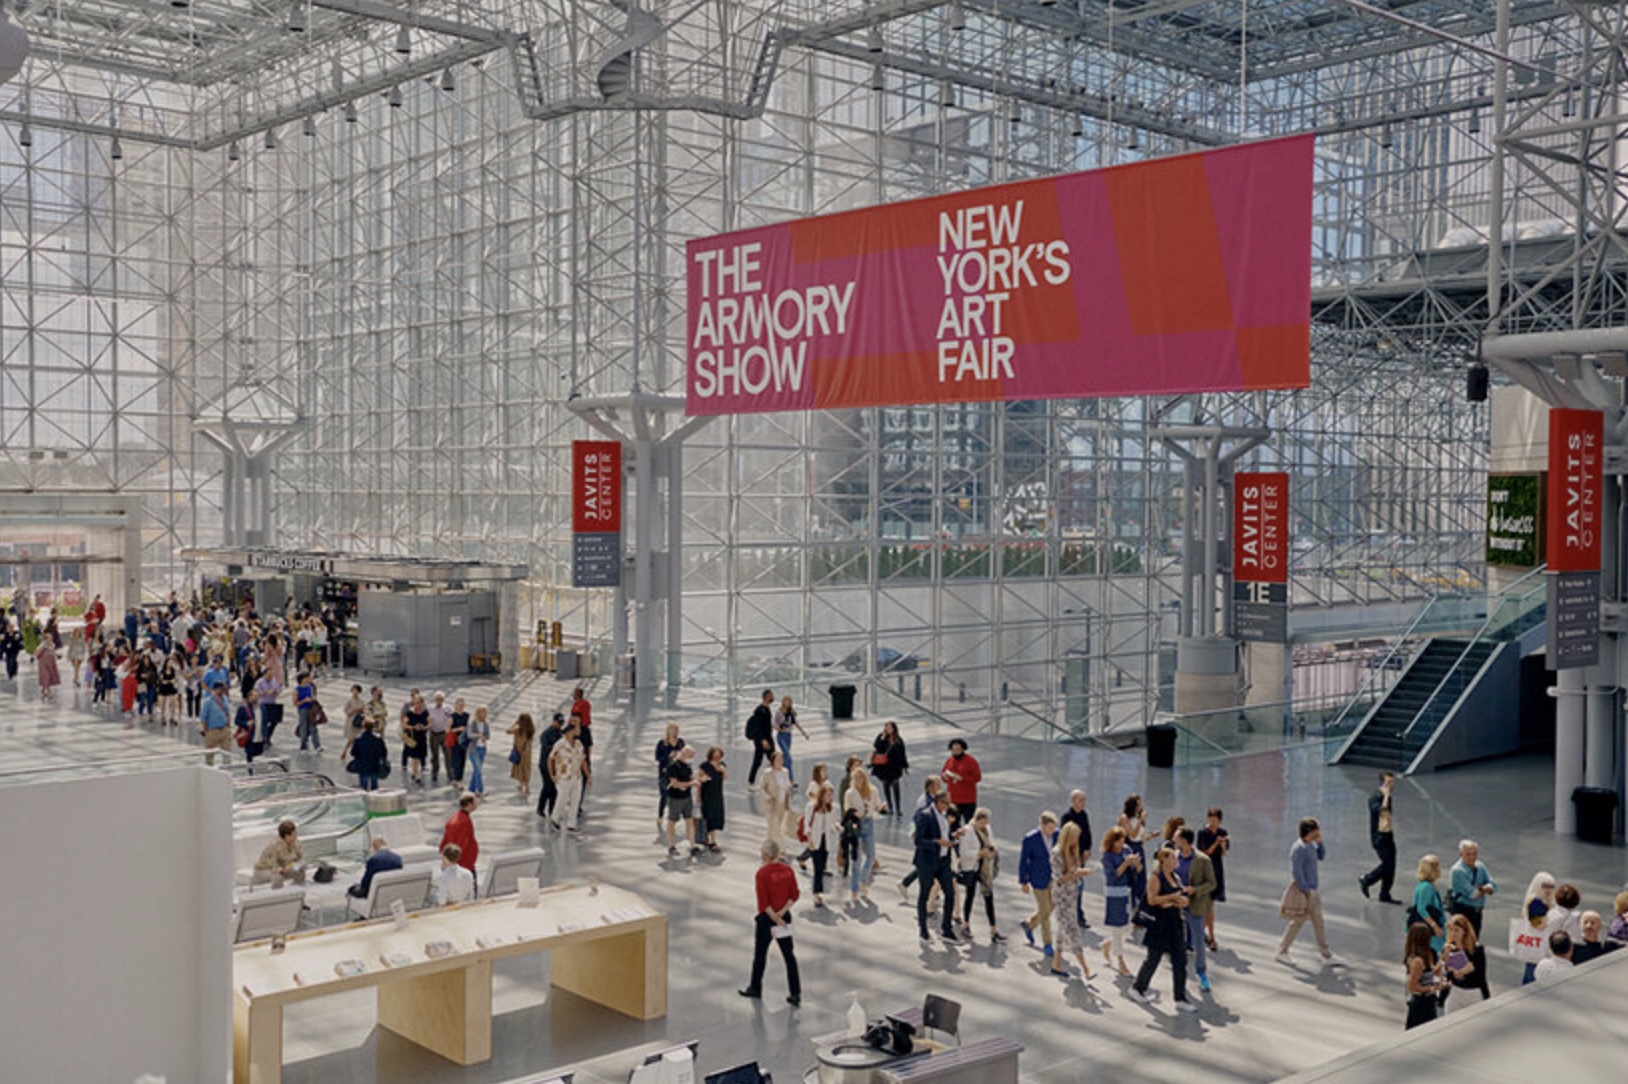 The-Armory-Show-2023-in-New-York.-Credit:-The-Armory-Show